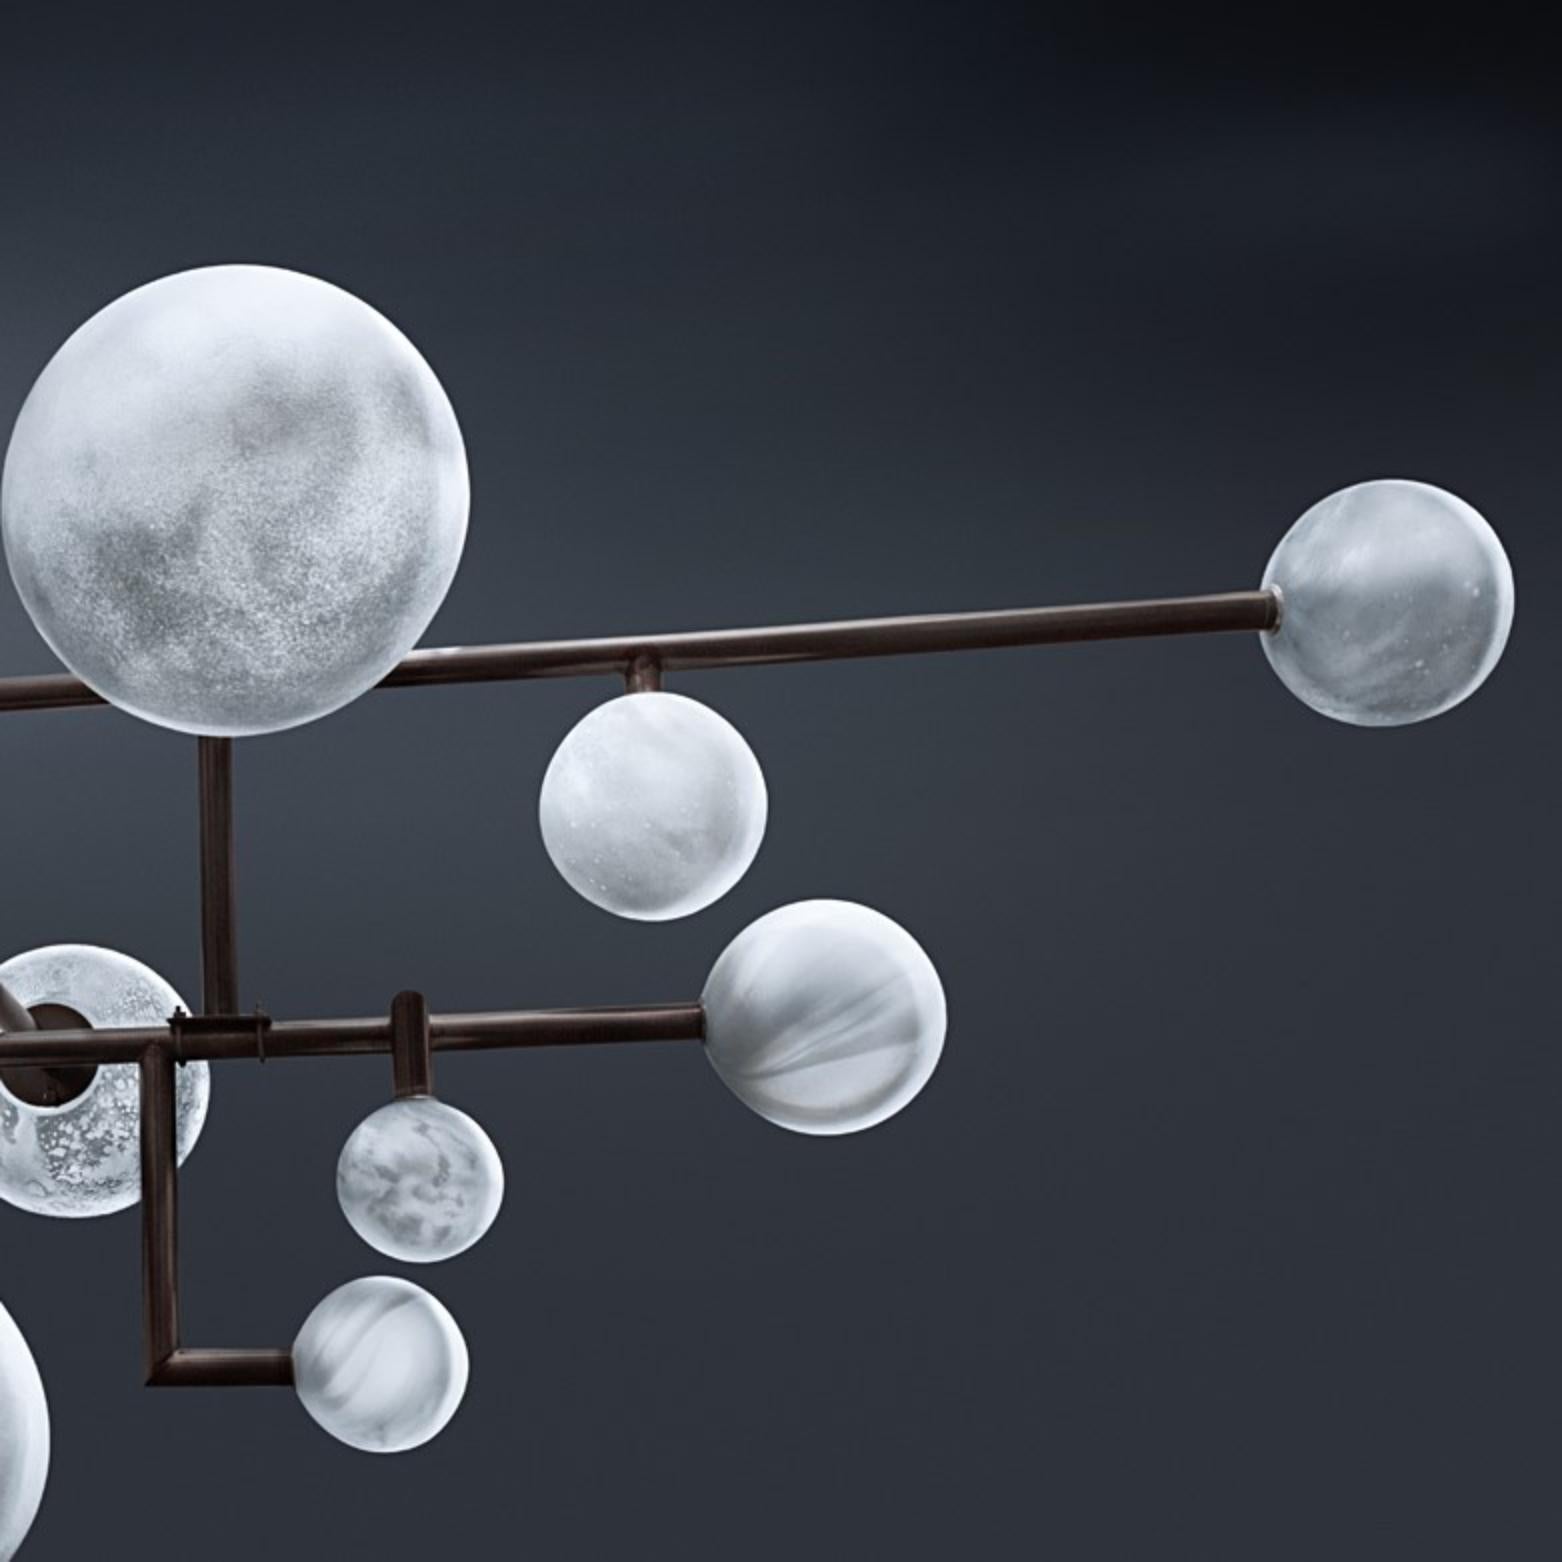 Modern Balanced Planets Chandelier by Ludovic Clément d'armont